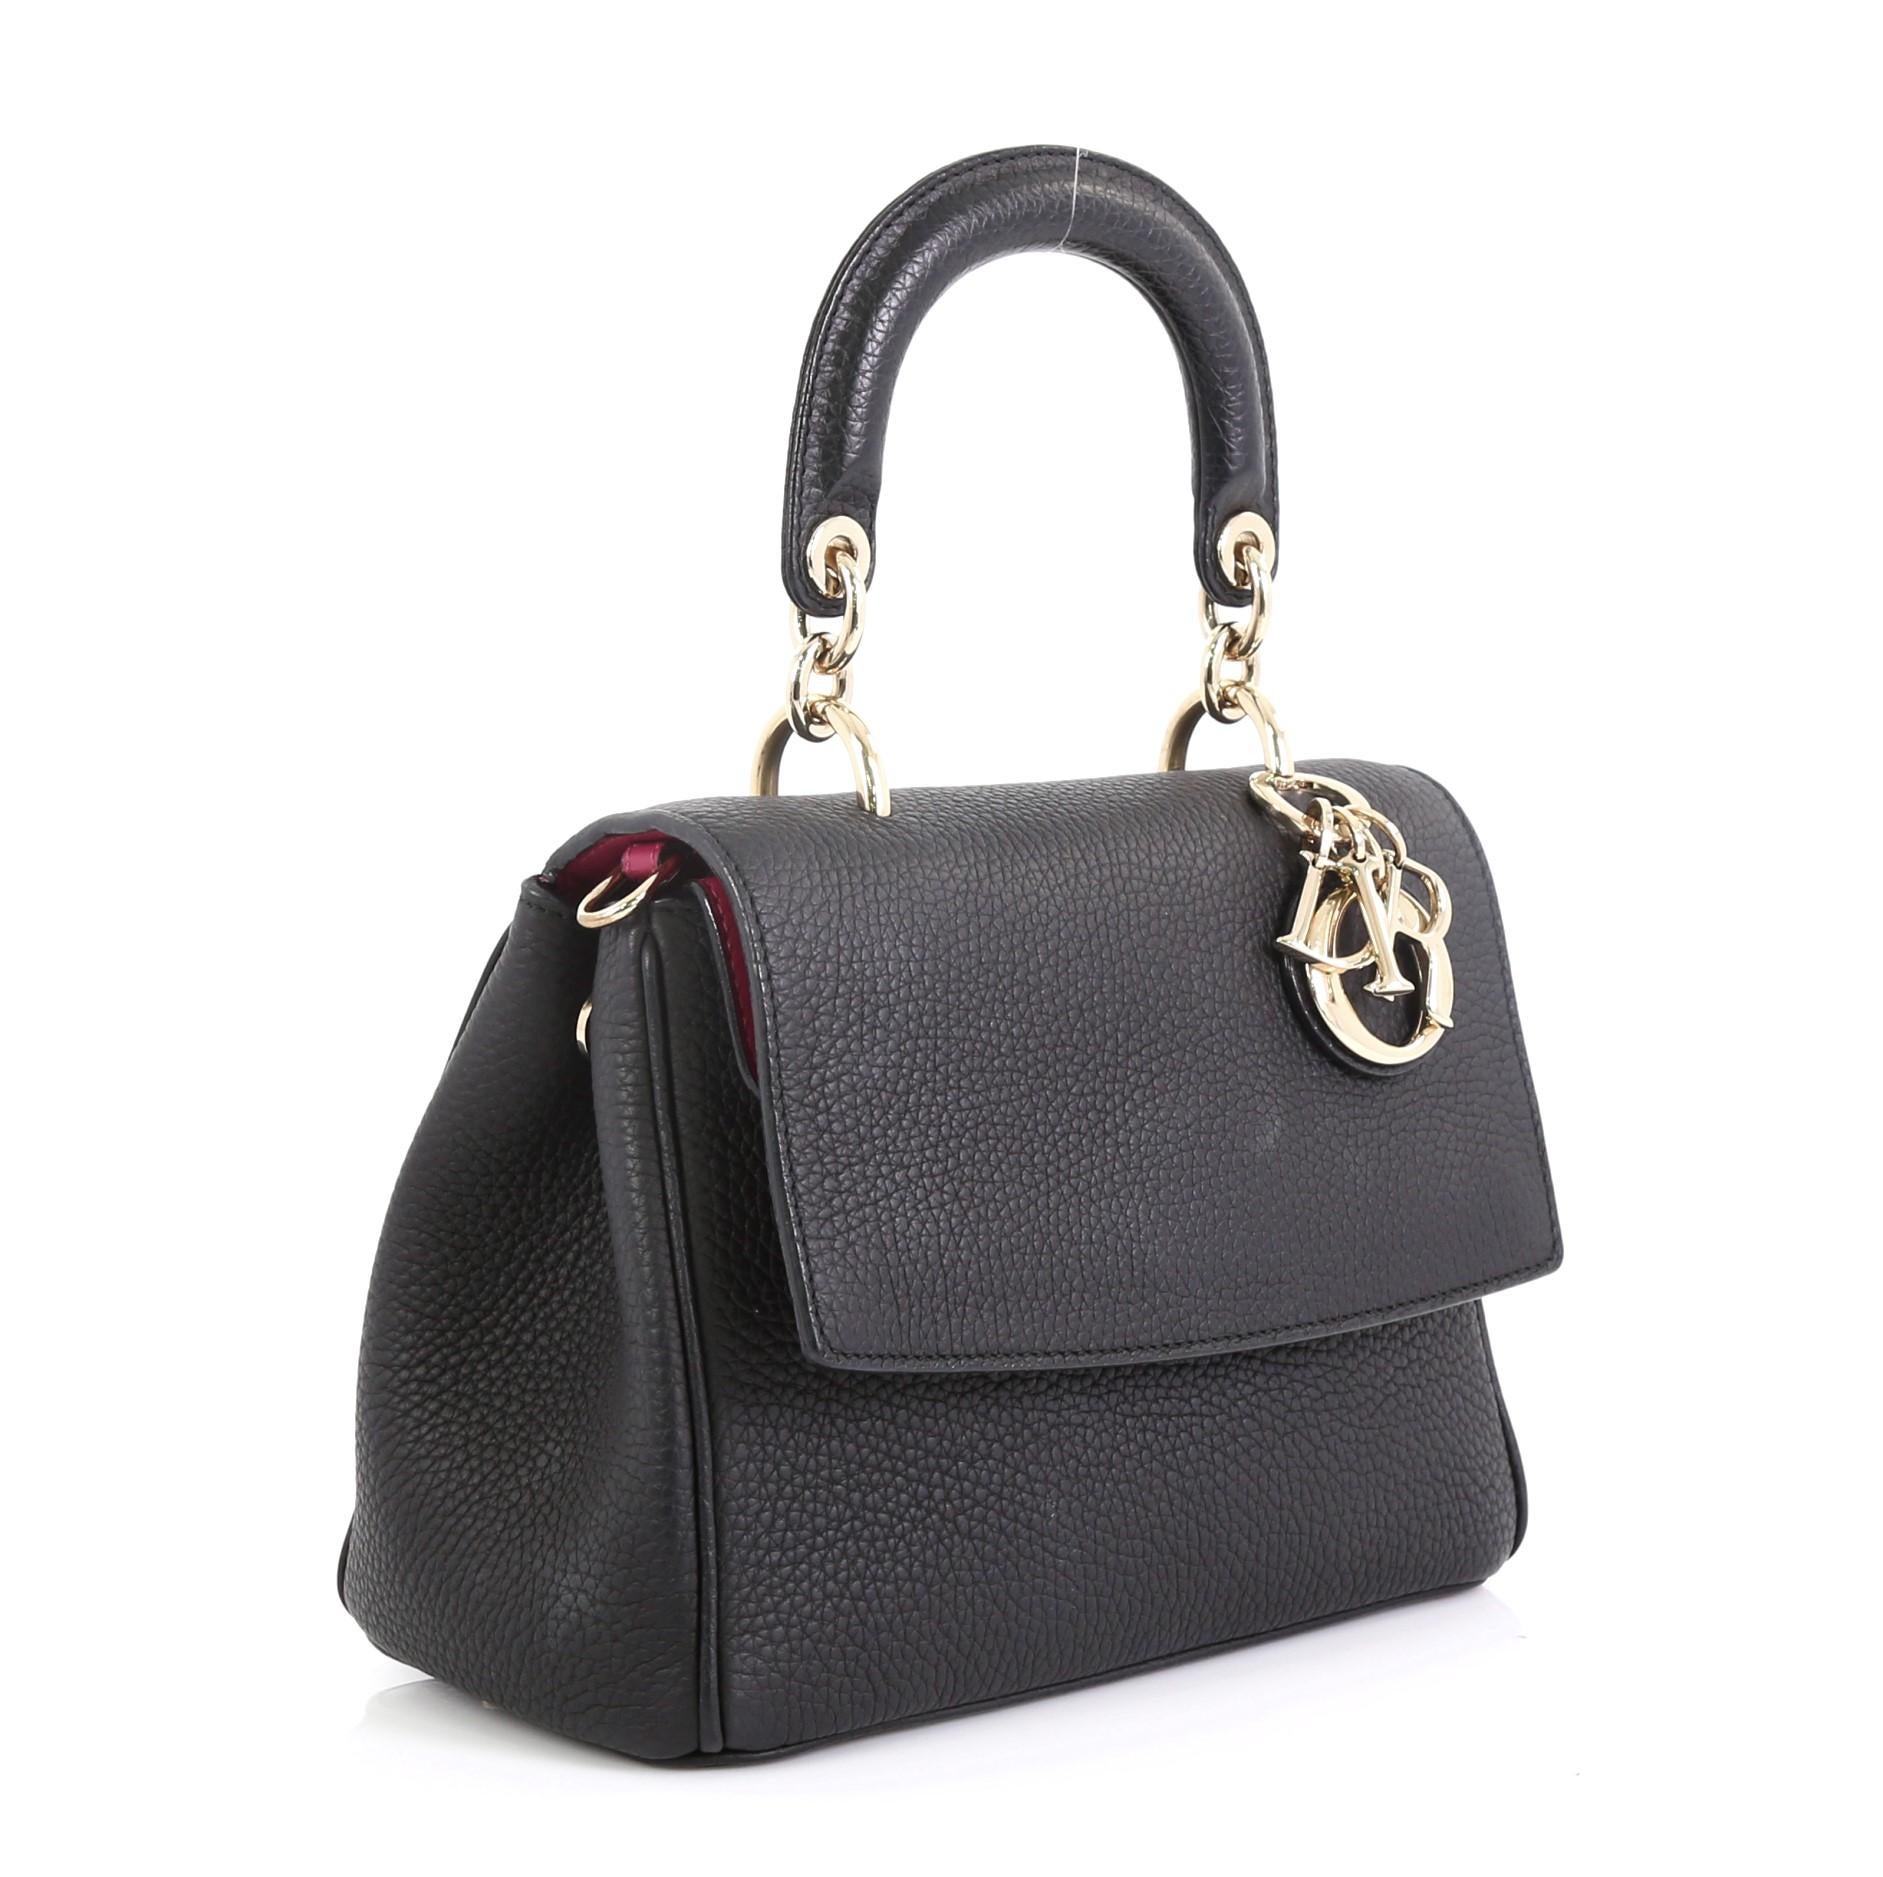 This Christian Dior Be Dior Bag Pebbled Leather Small, crafted from black pebbled leather, features leather handle with Dior charms, side snap buttons, exterior back pocket, protective base studs and gold-tone hardware. Its flap opens to a pink